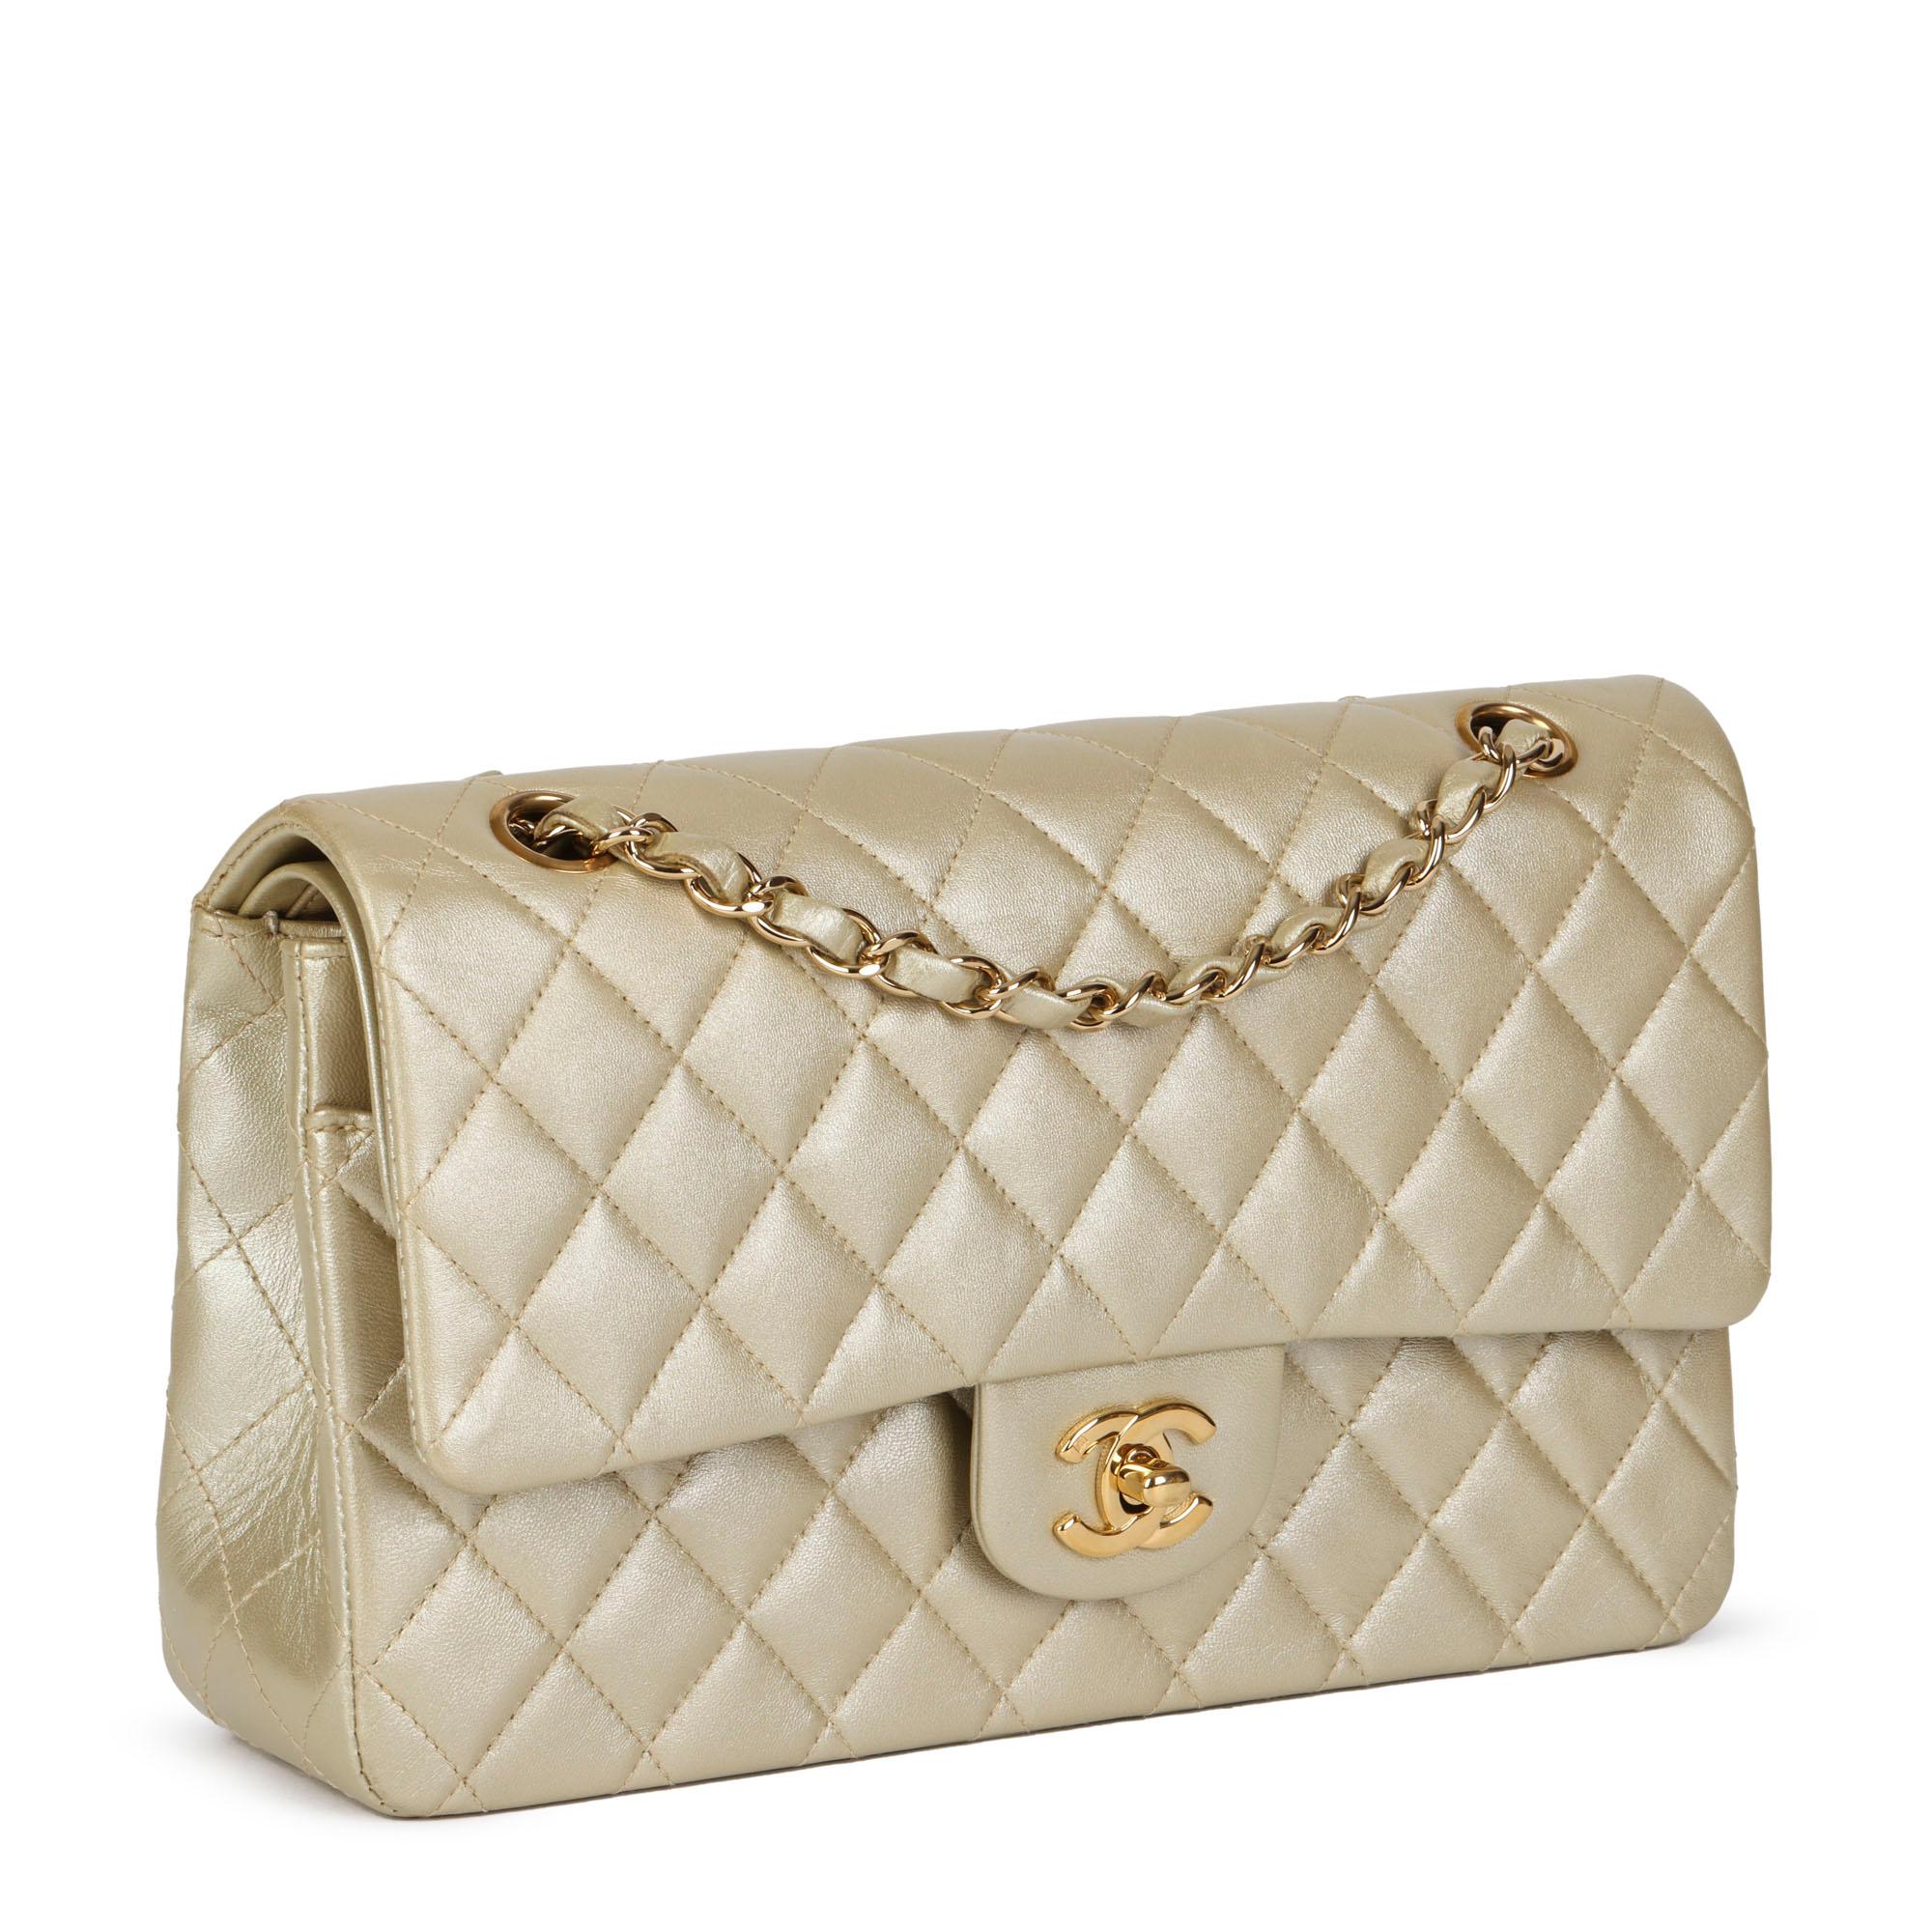 CHANEL
Pearlescent Pale Green Quilted Metallic Lambskin Medium Classic Double Flap Bag 

Xupes Reference: HB4423
Serial Number: 7467741
Age (Circa): 2003
Accompanied By: Chanel Dust Bag, Authenticity Card, Care Booklet
Authenticity Details: